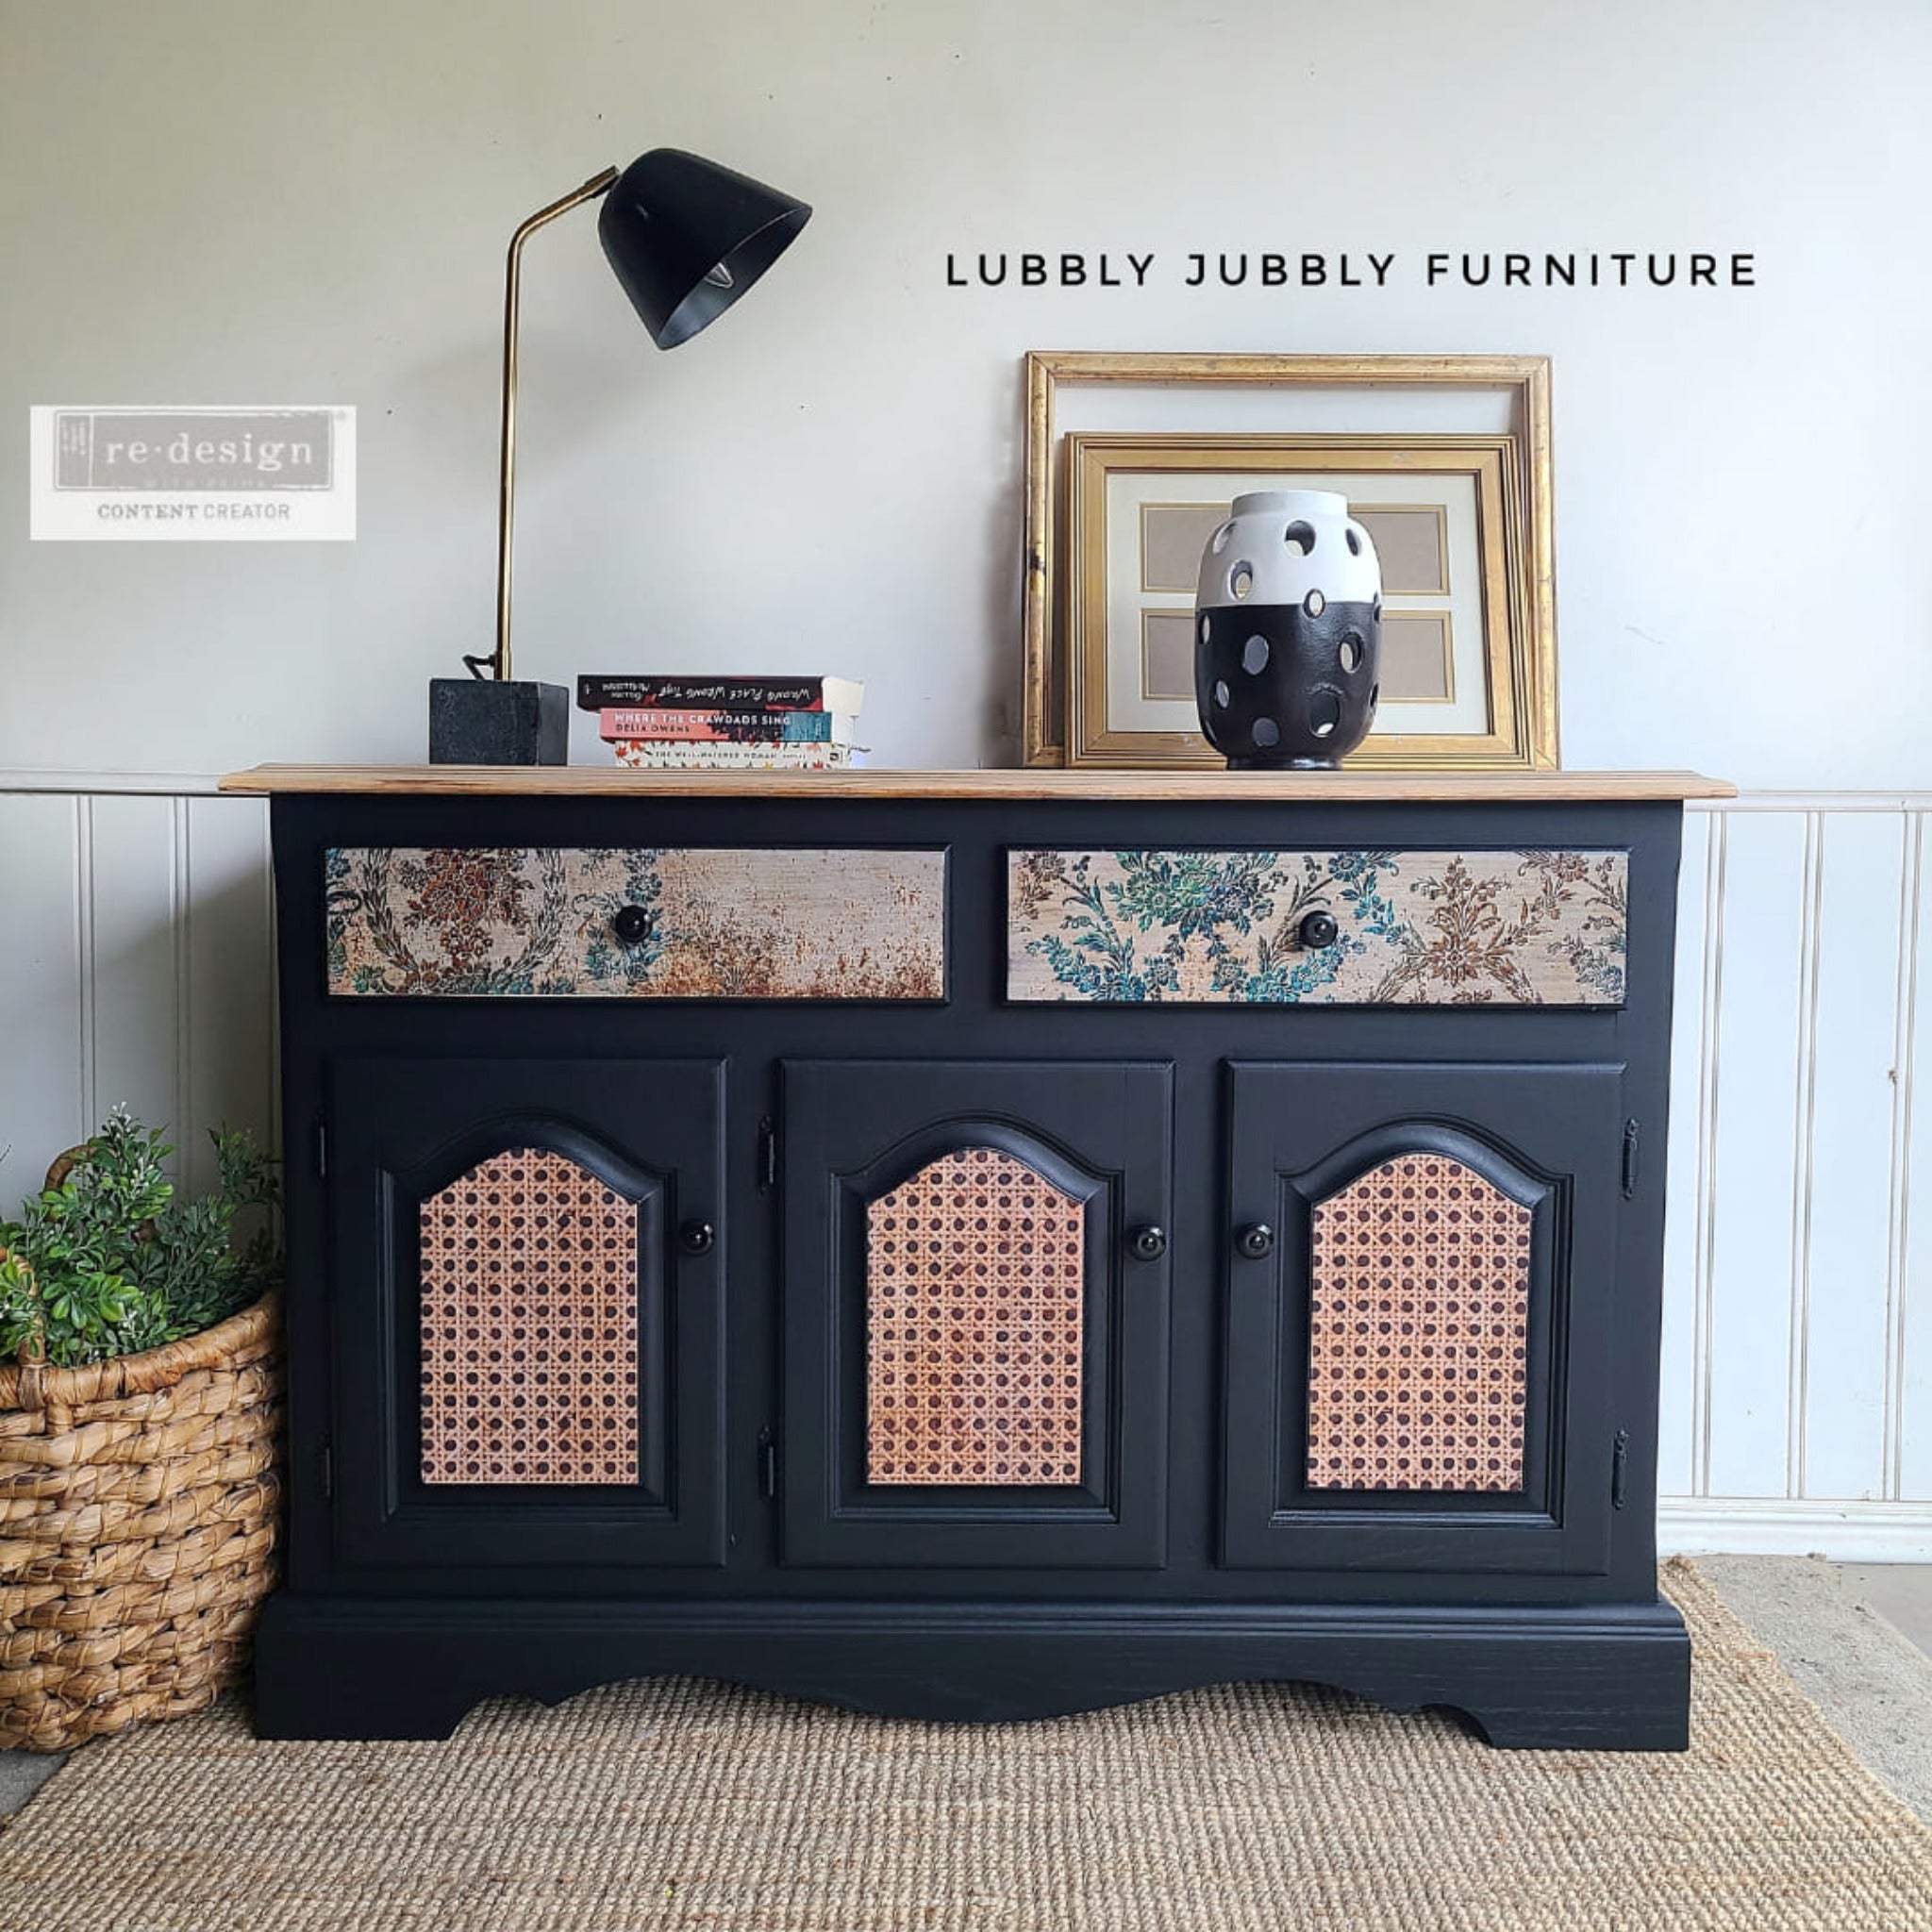 A buffet table refurbished by Lubbly Jubbly Furniture is painted black with a natural wood top and features ReDesign with Prima's Rustic Patina tissue paper on its 2 drawers.